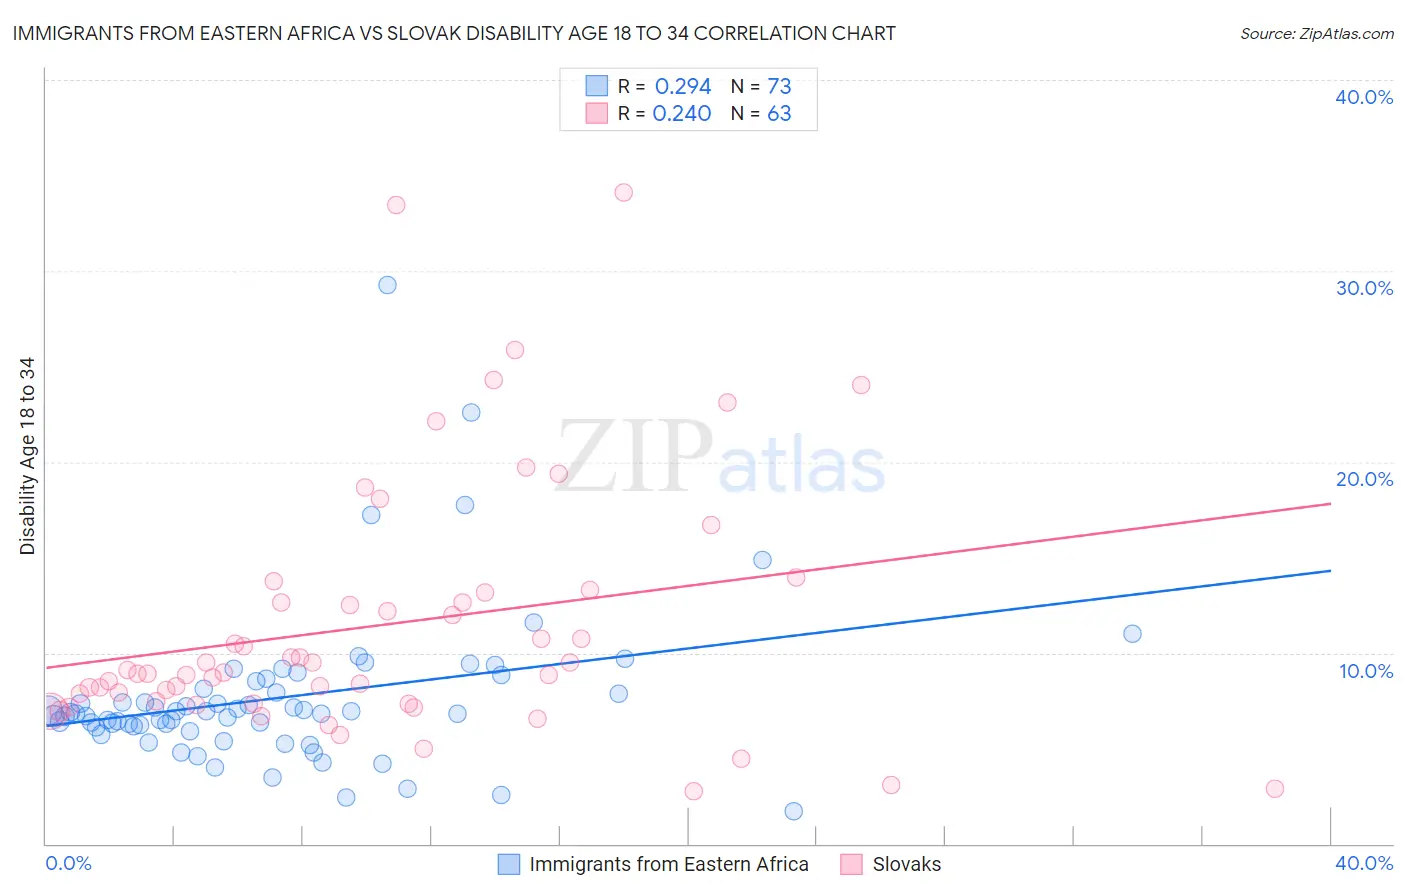 Immigrants from Eastern Africa vs Slovak Disability Age 18 to 34